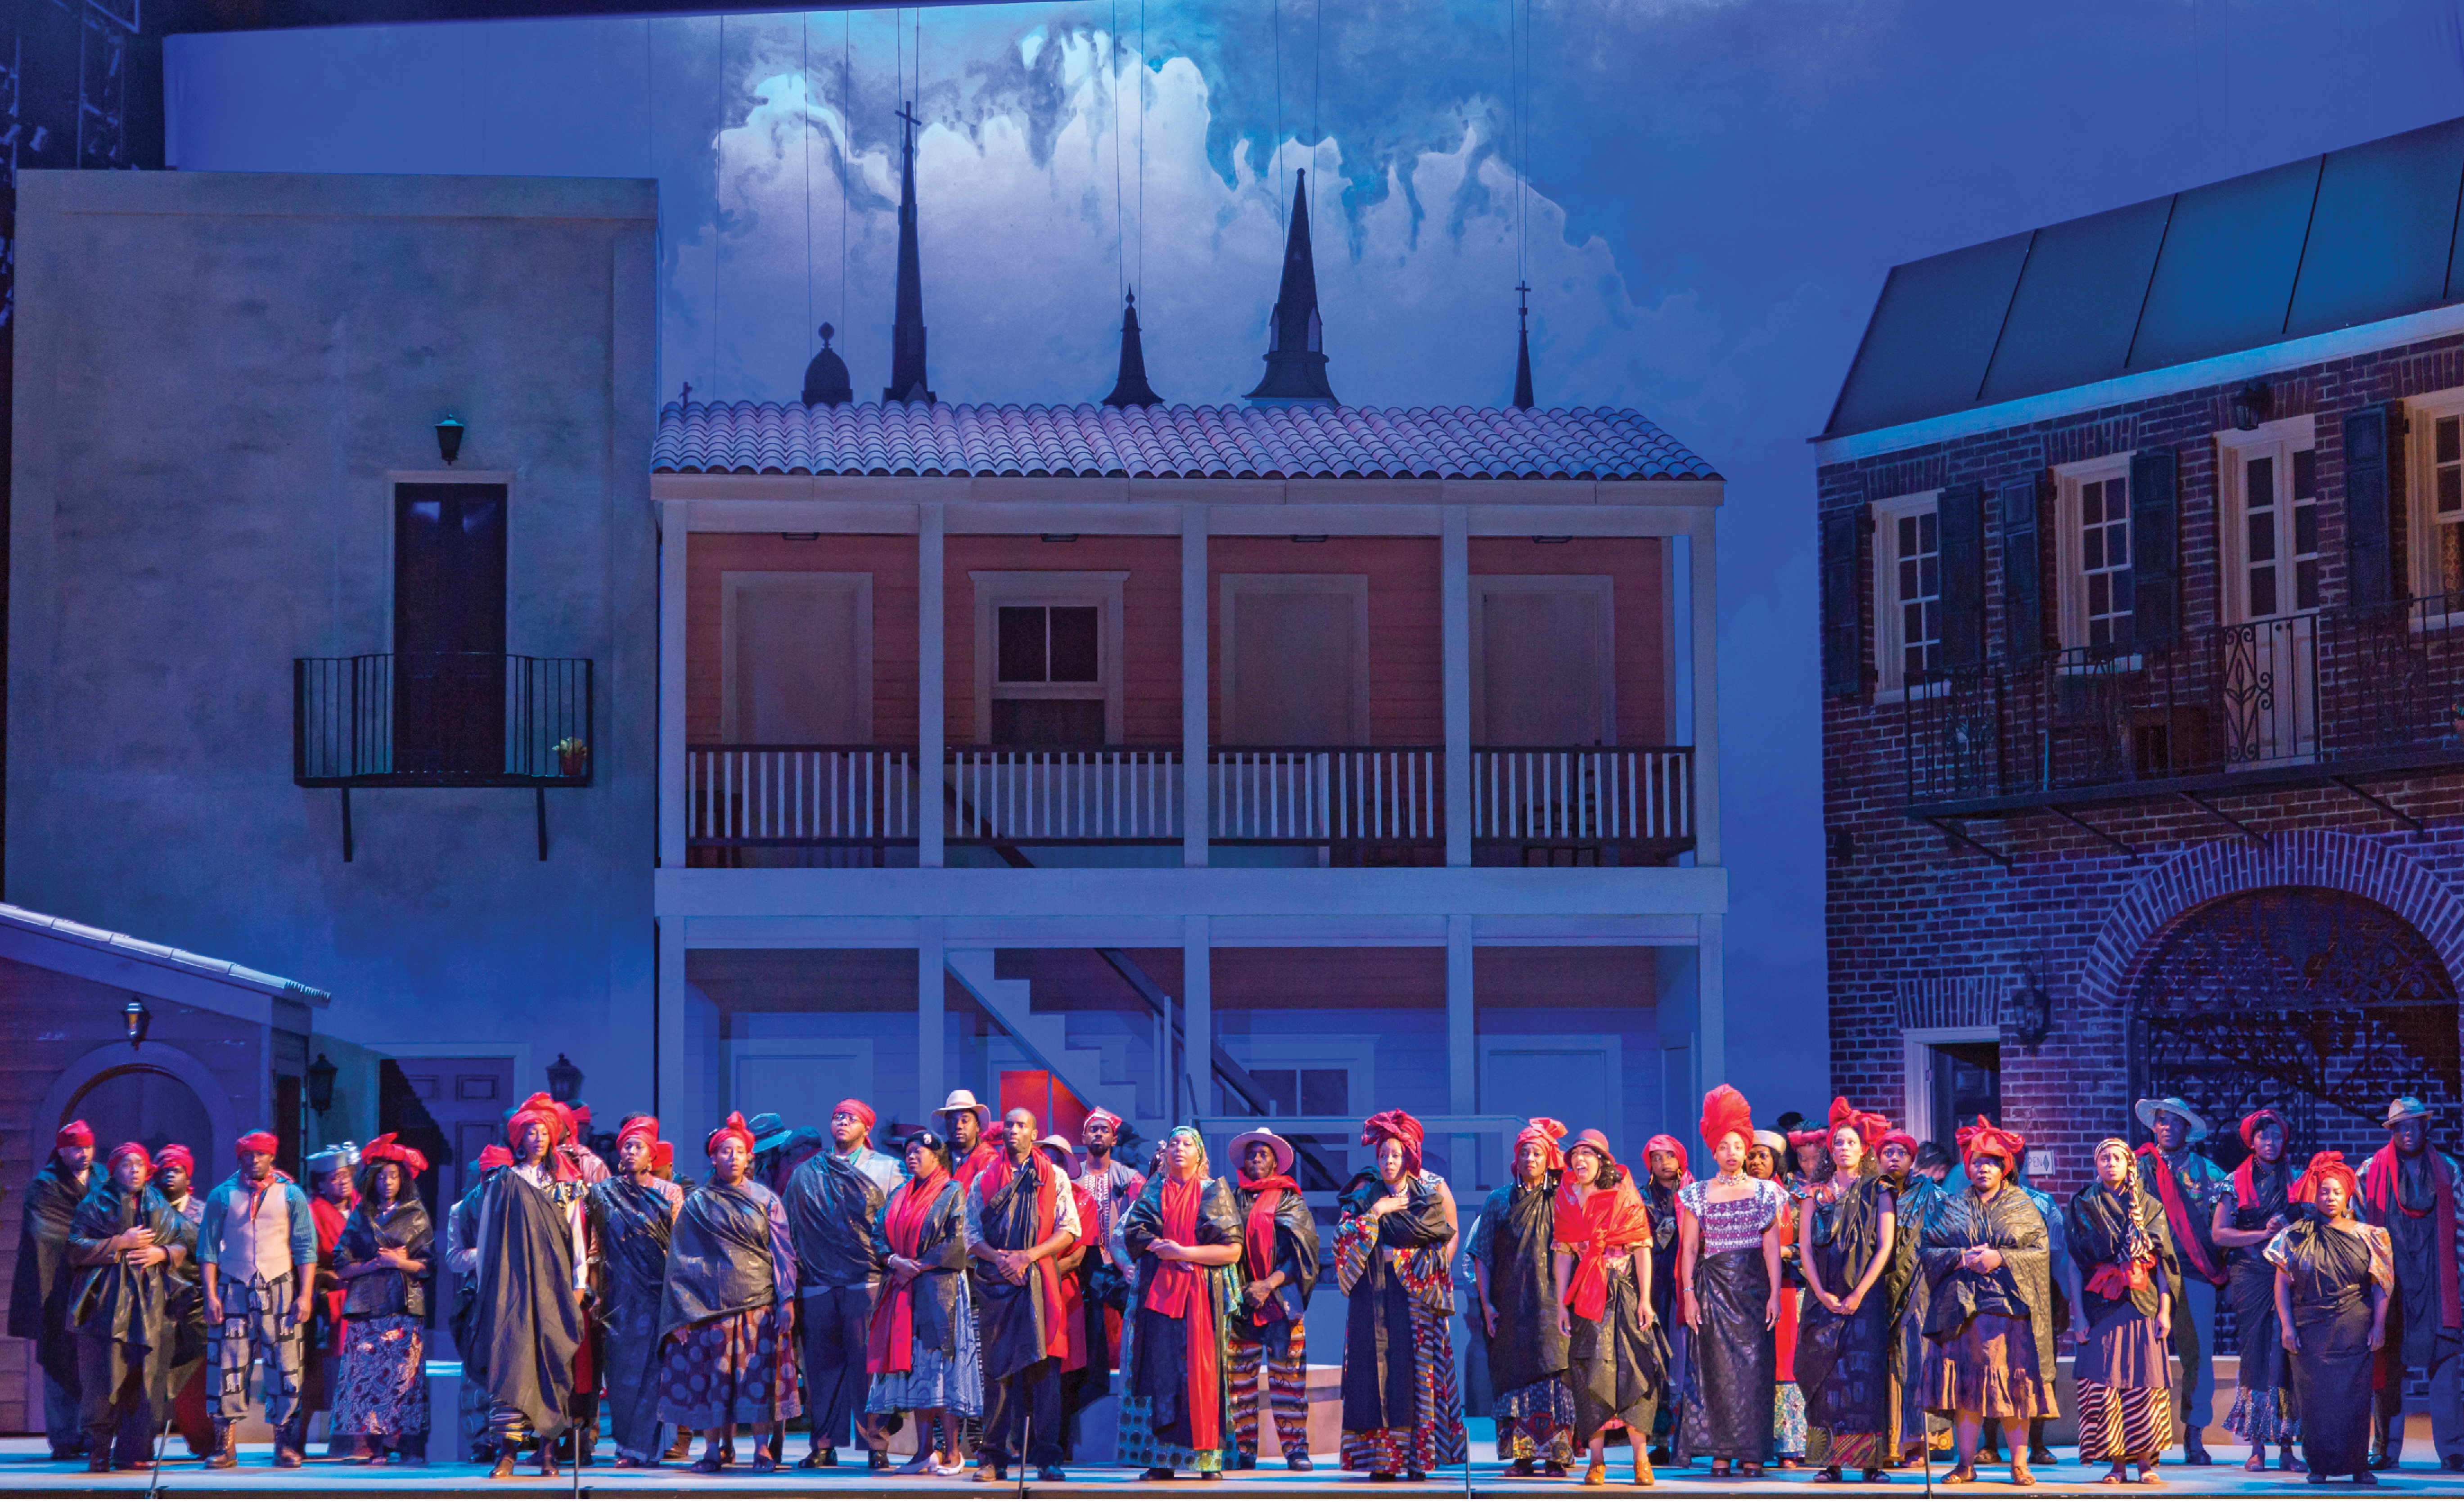 A scene from Spoleto Festival USA’s 2016 production of Porgy and Bess, the premiere production that christened the new Gaillard Center and showcased the visual design of local artist Jonathan Green